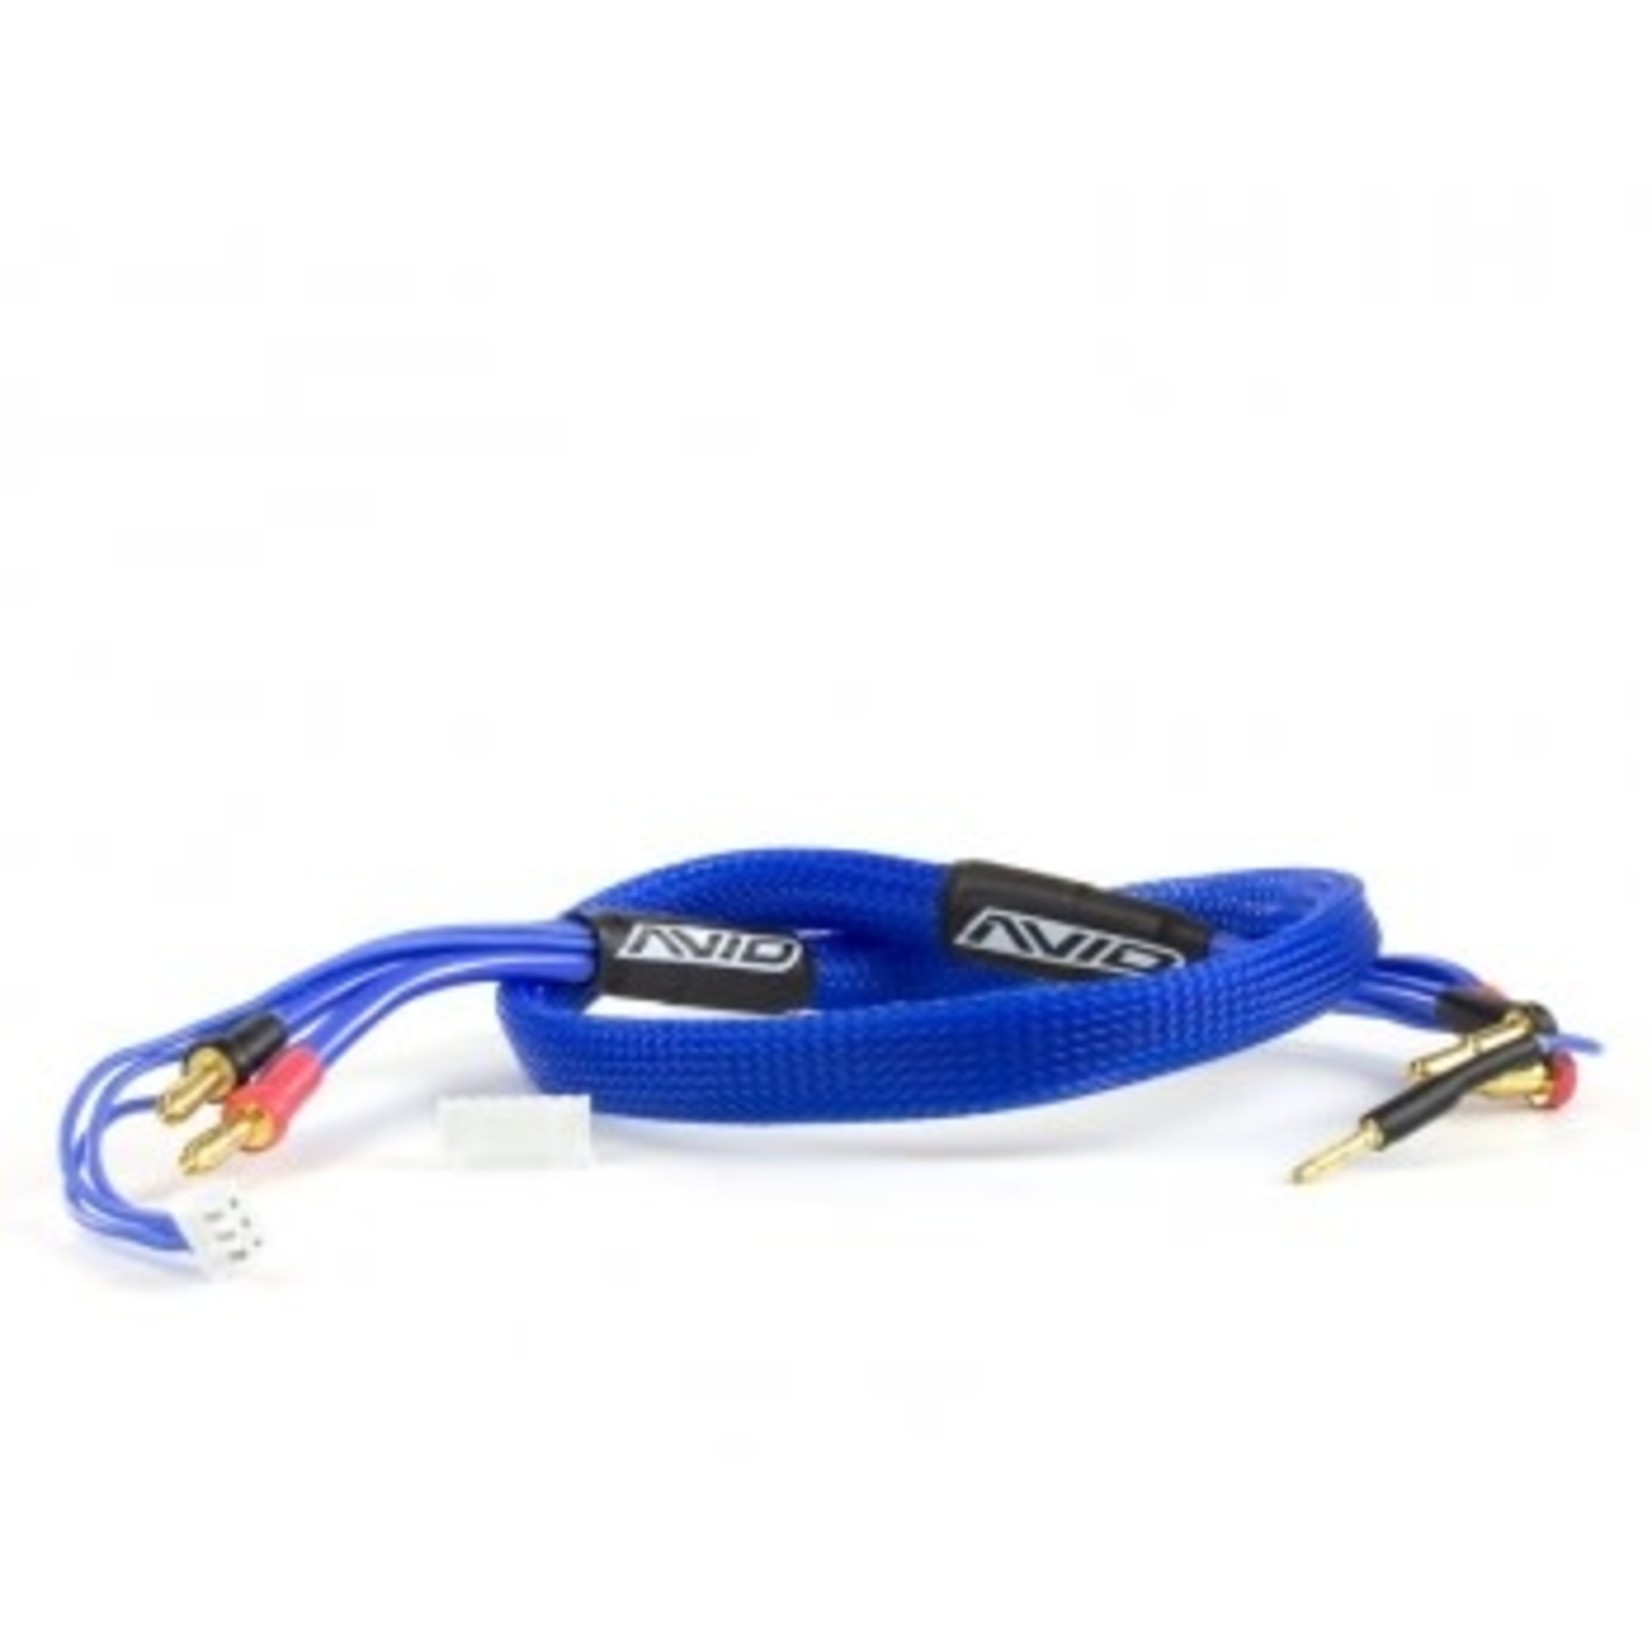 Avid RC Avid 2S Charge Lead Cable w/4mm & 5mm Bullet Connector (2') Blue